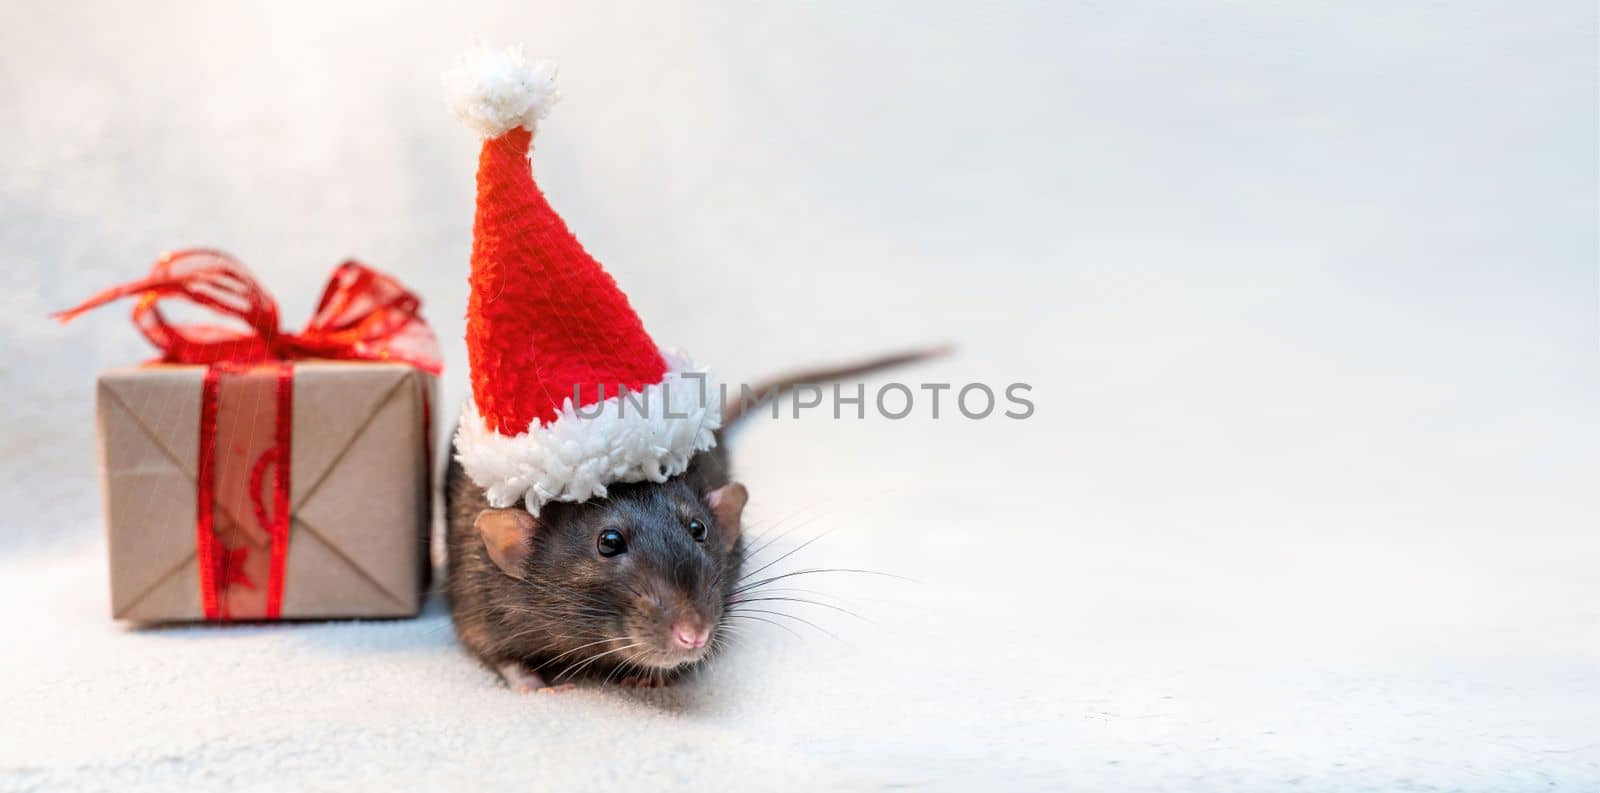 Rat Santa hat gift. Symbol of the Chinese New Year. Funny black Dumbo rat in a red Santa hat and a gift box with a red ribbon on a white background